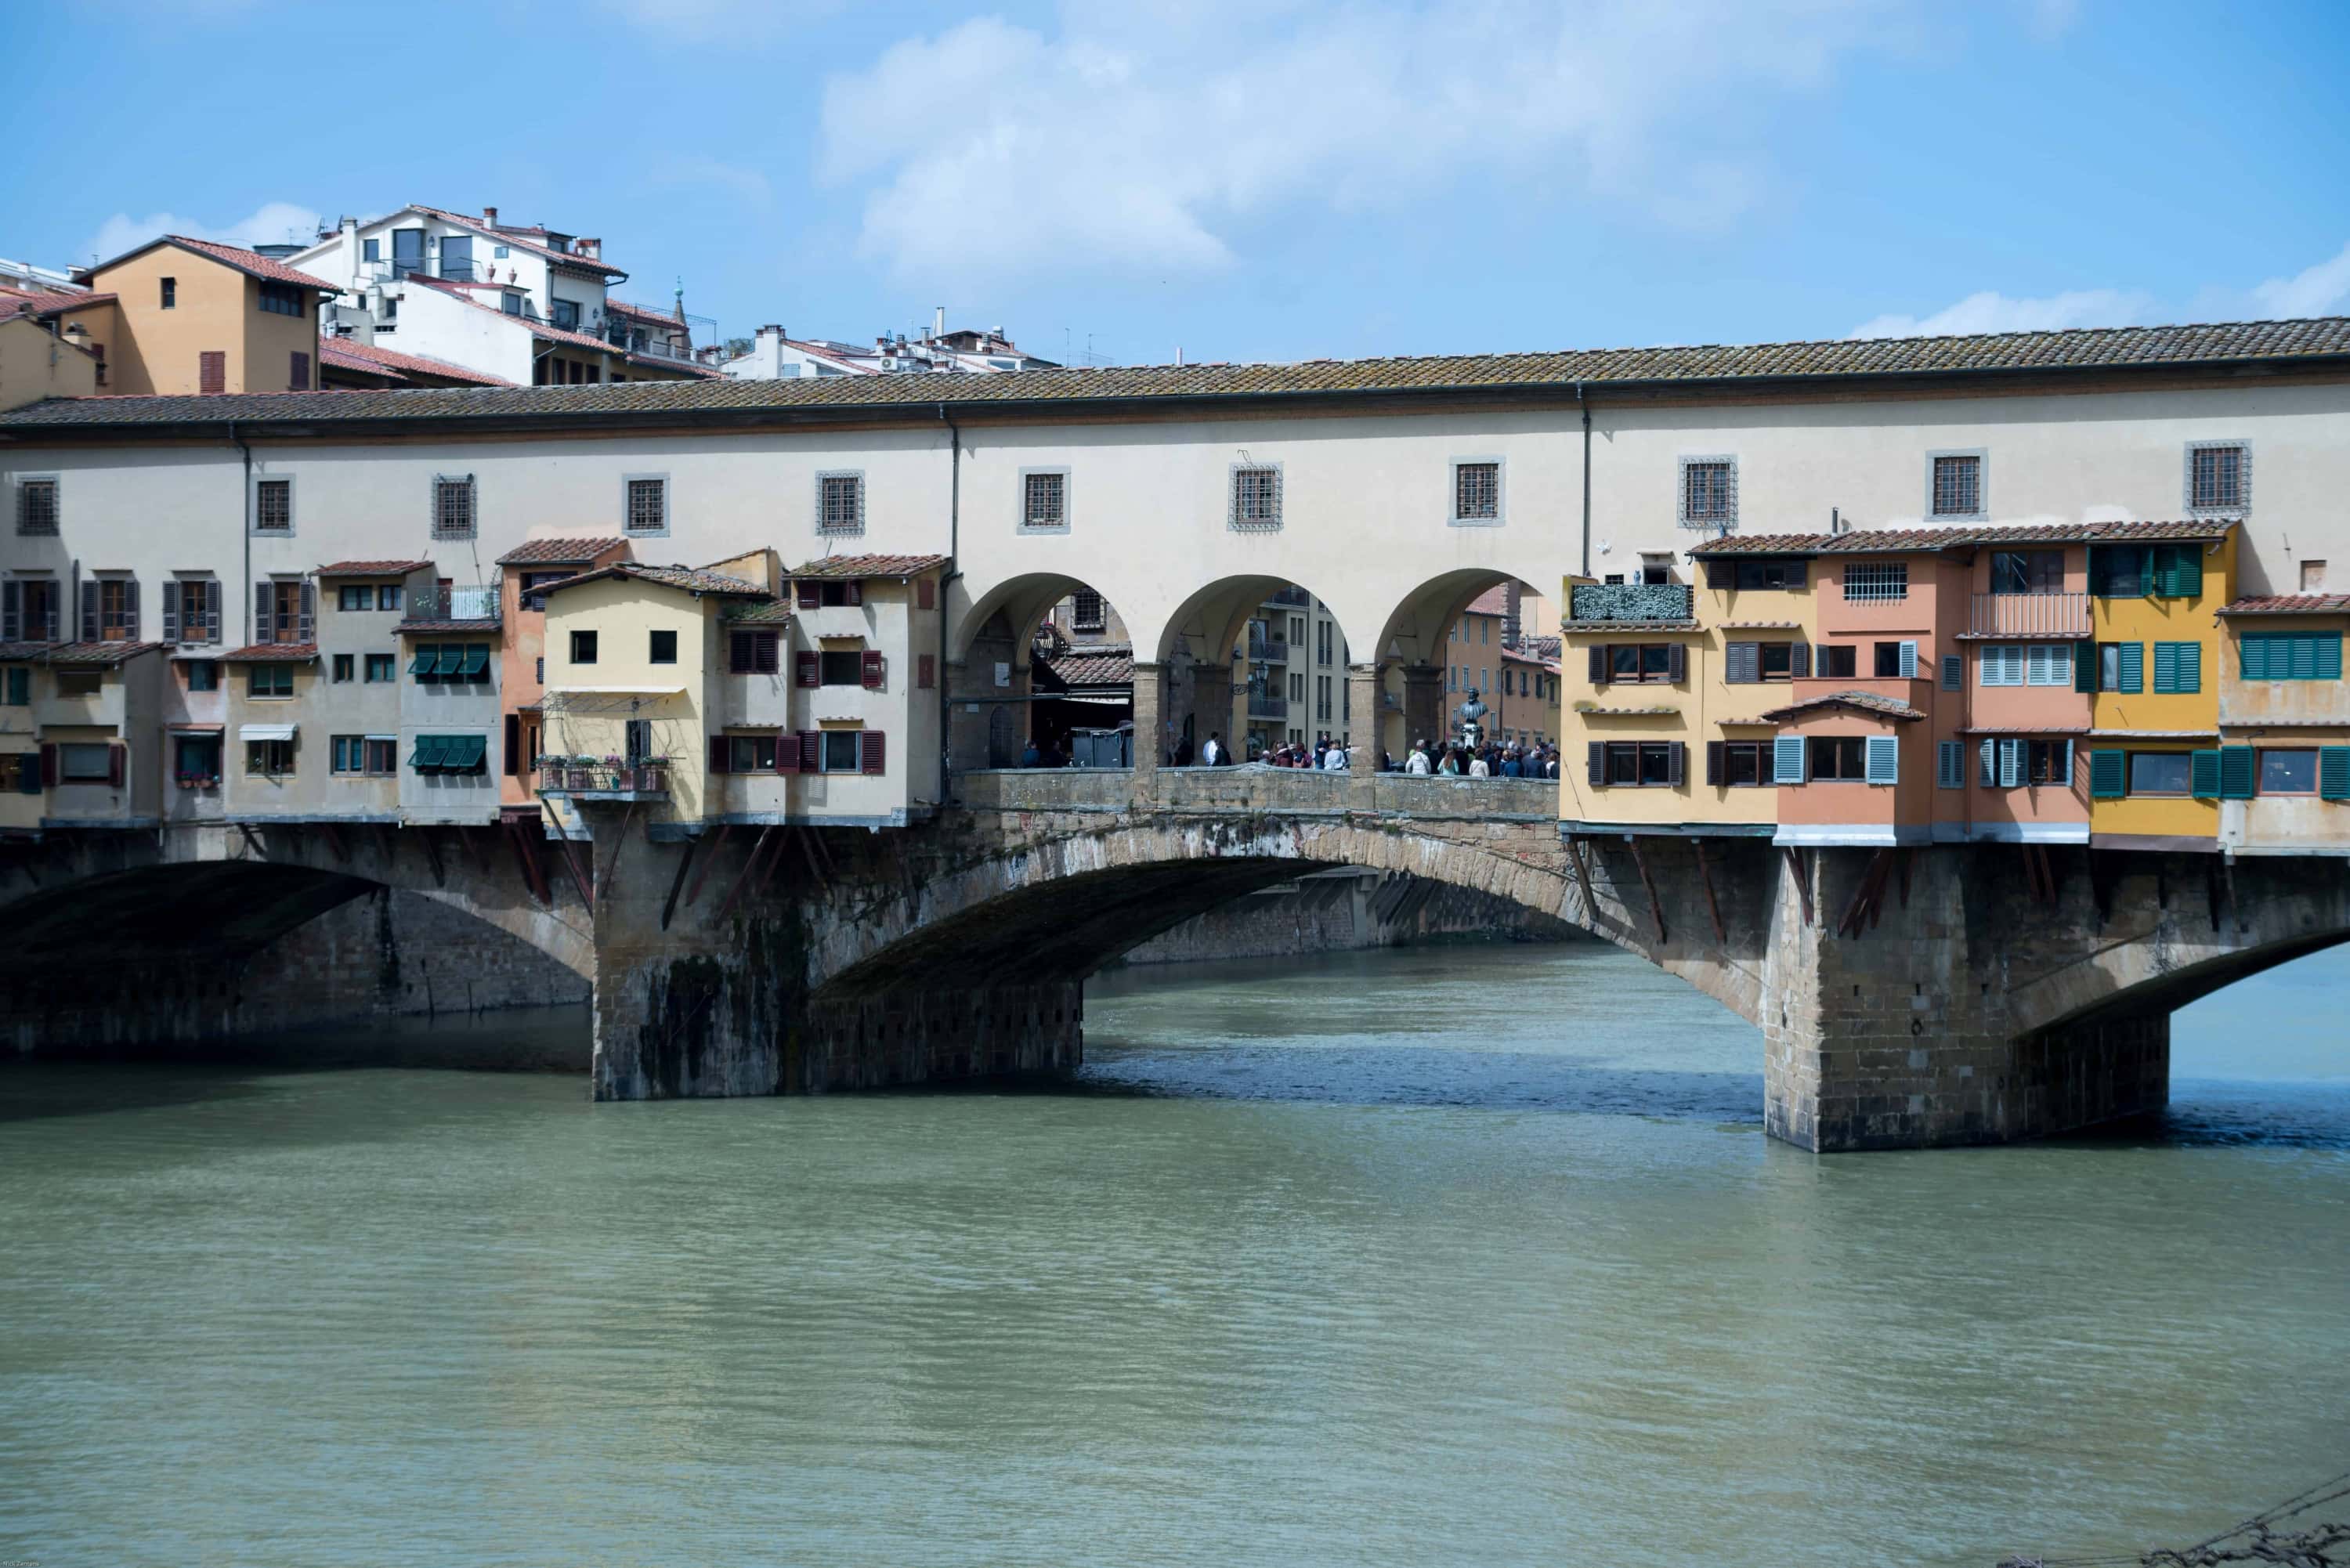 Covered bridge in Florence Italy